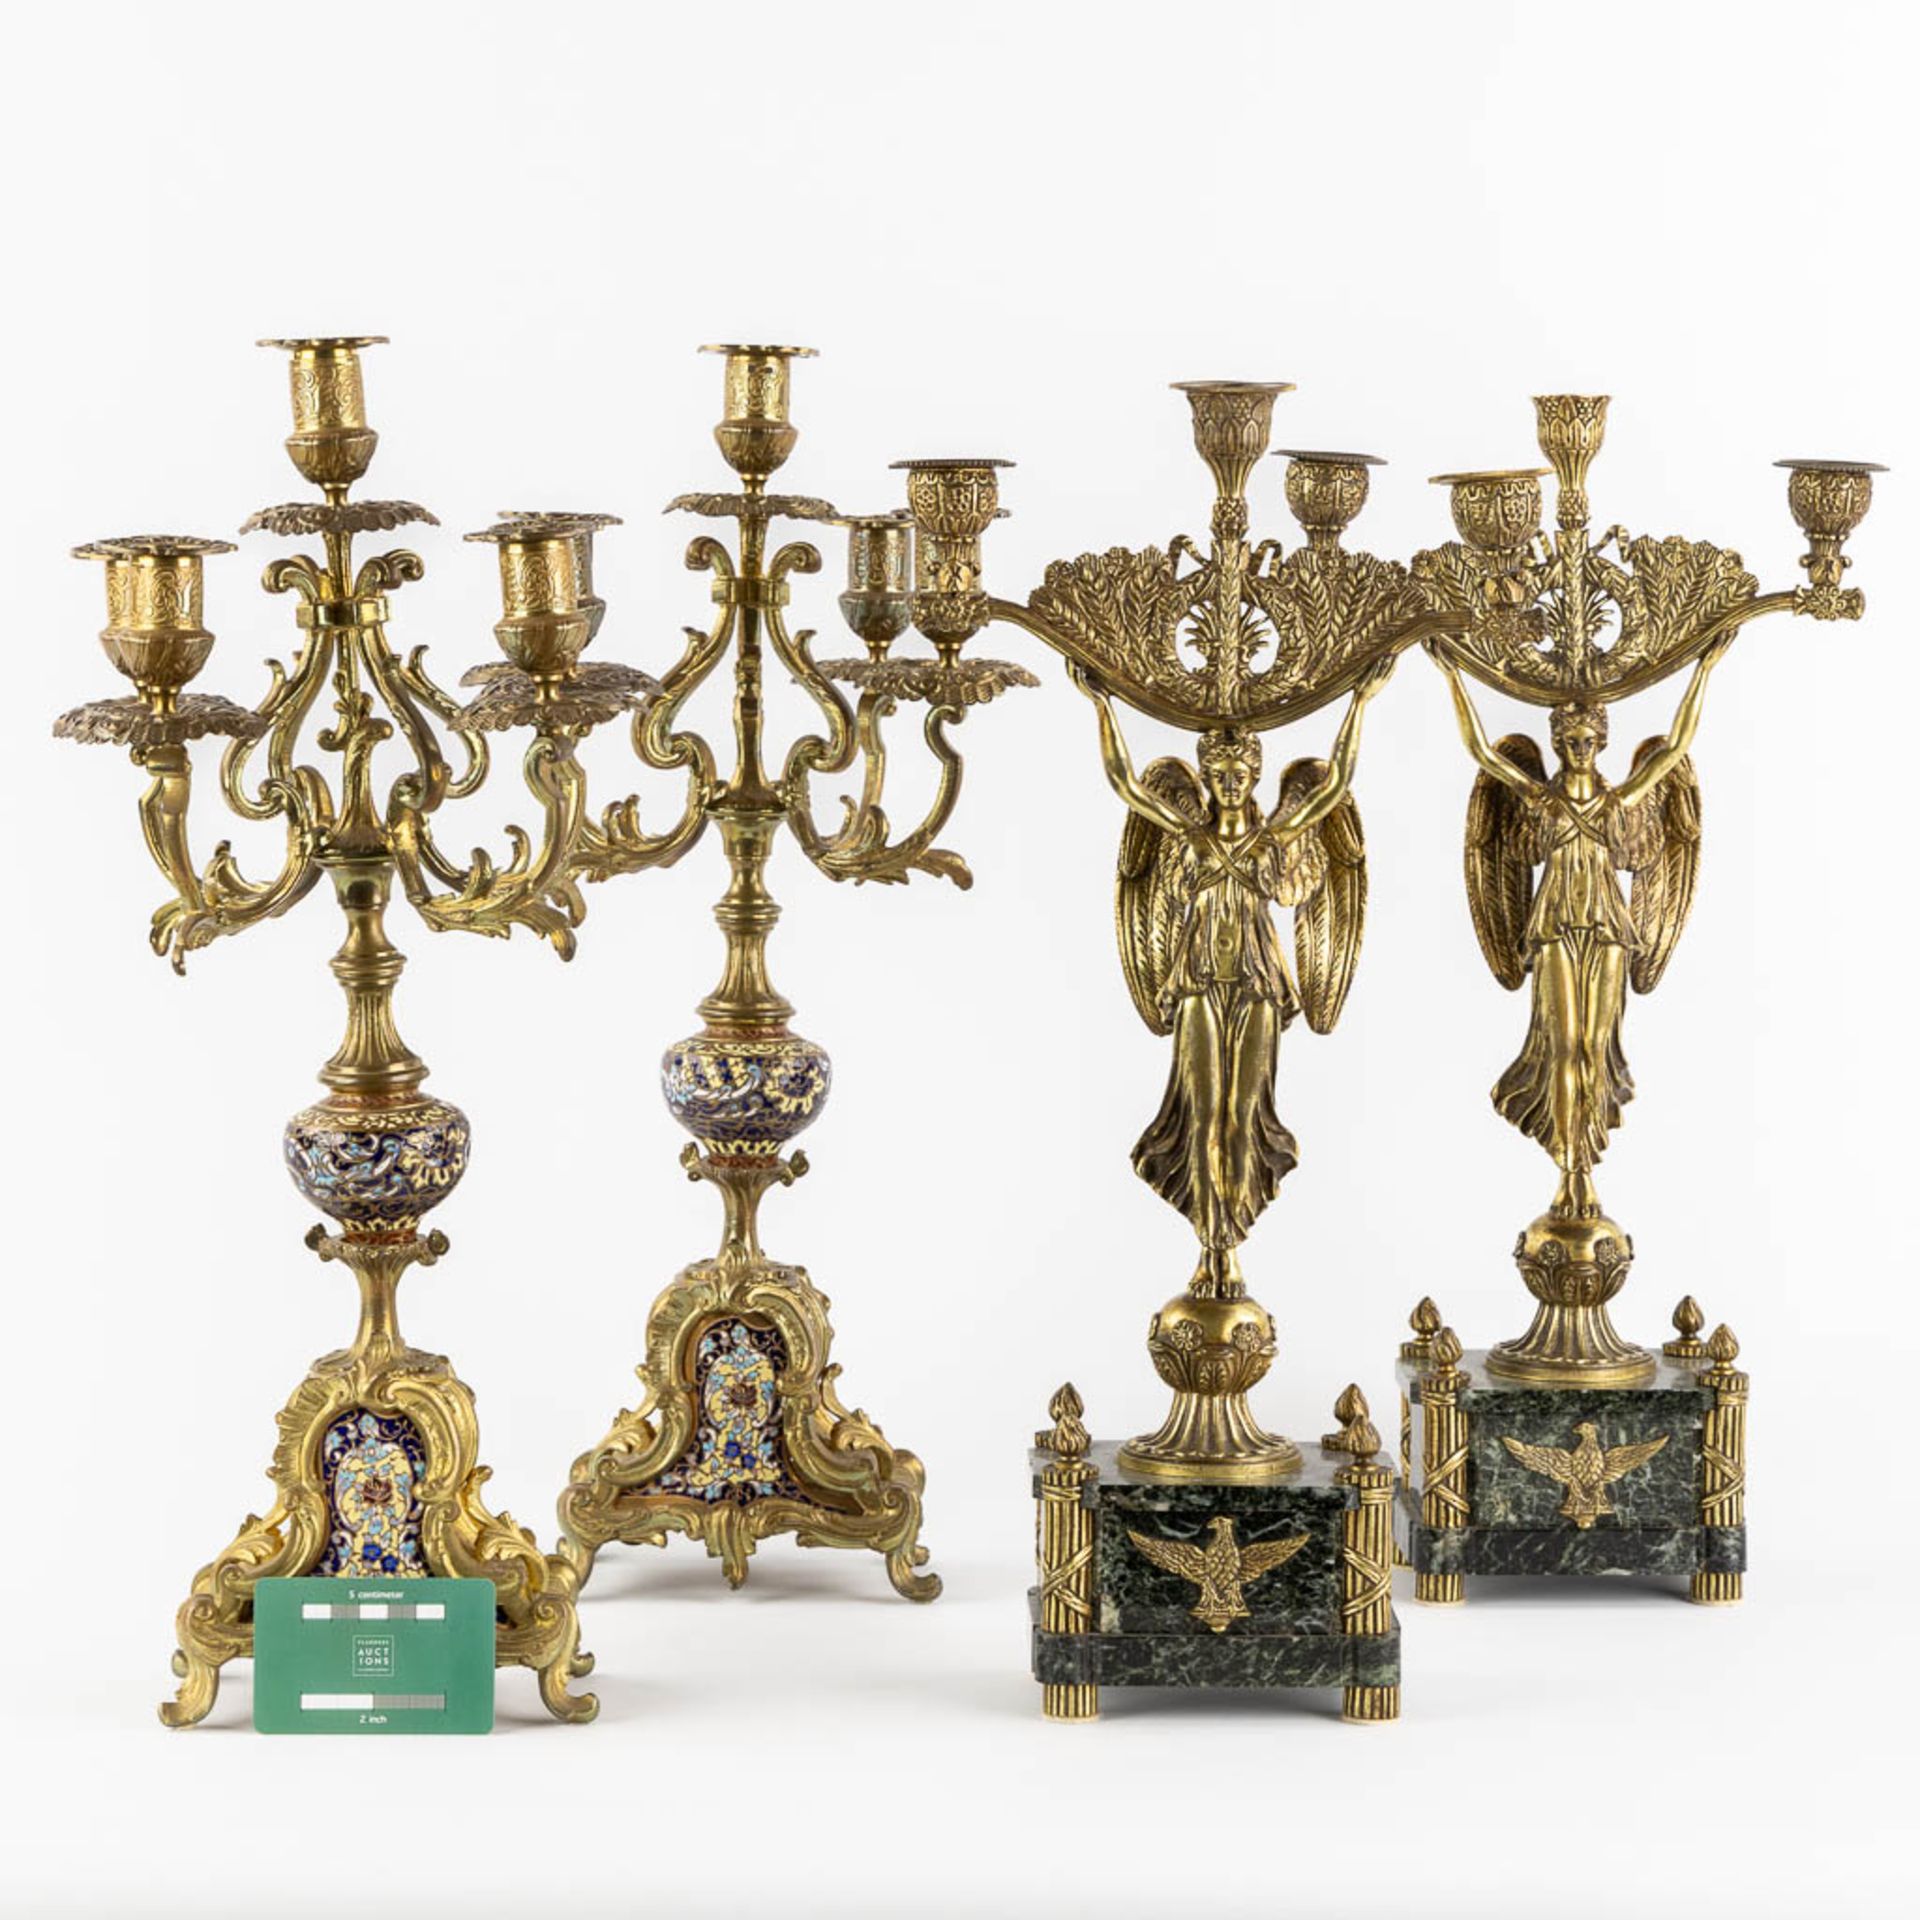 Two pairs of candelabra, bronze and cloisonné, Empire and Louis XVI style. (H:49 x D:26 cm) - Bild 2 aus 18